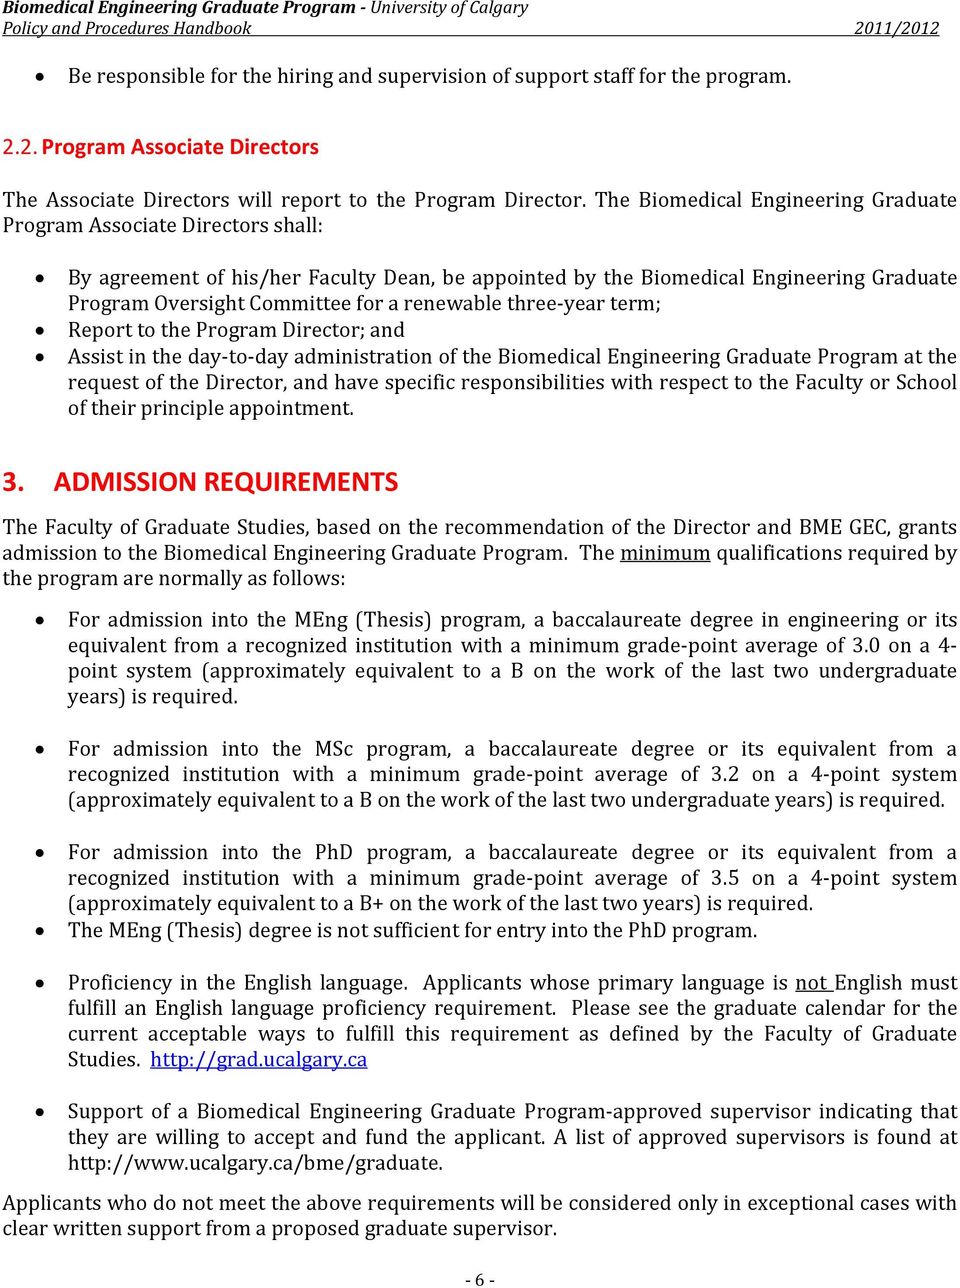 renewable three year term; Report to the Program Director; and Assist in the day to day administration of the Biomedical Engineering Graduate Program at the request of the Director, and have specific